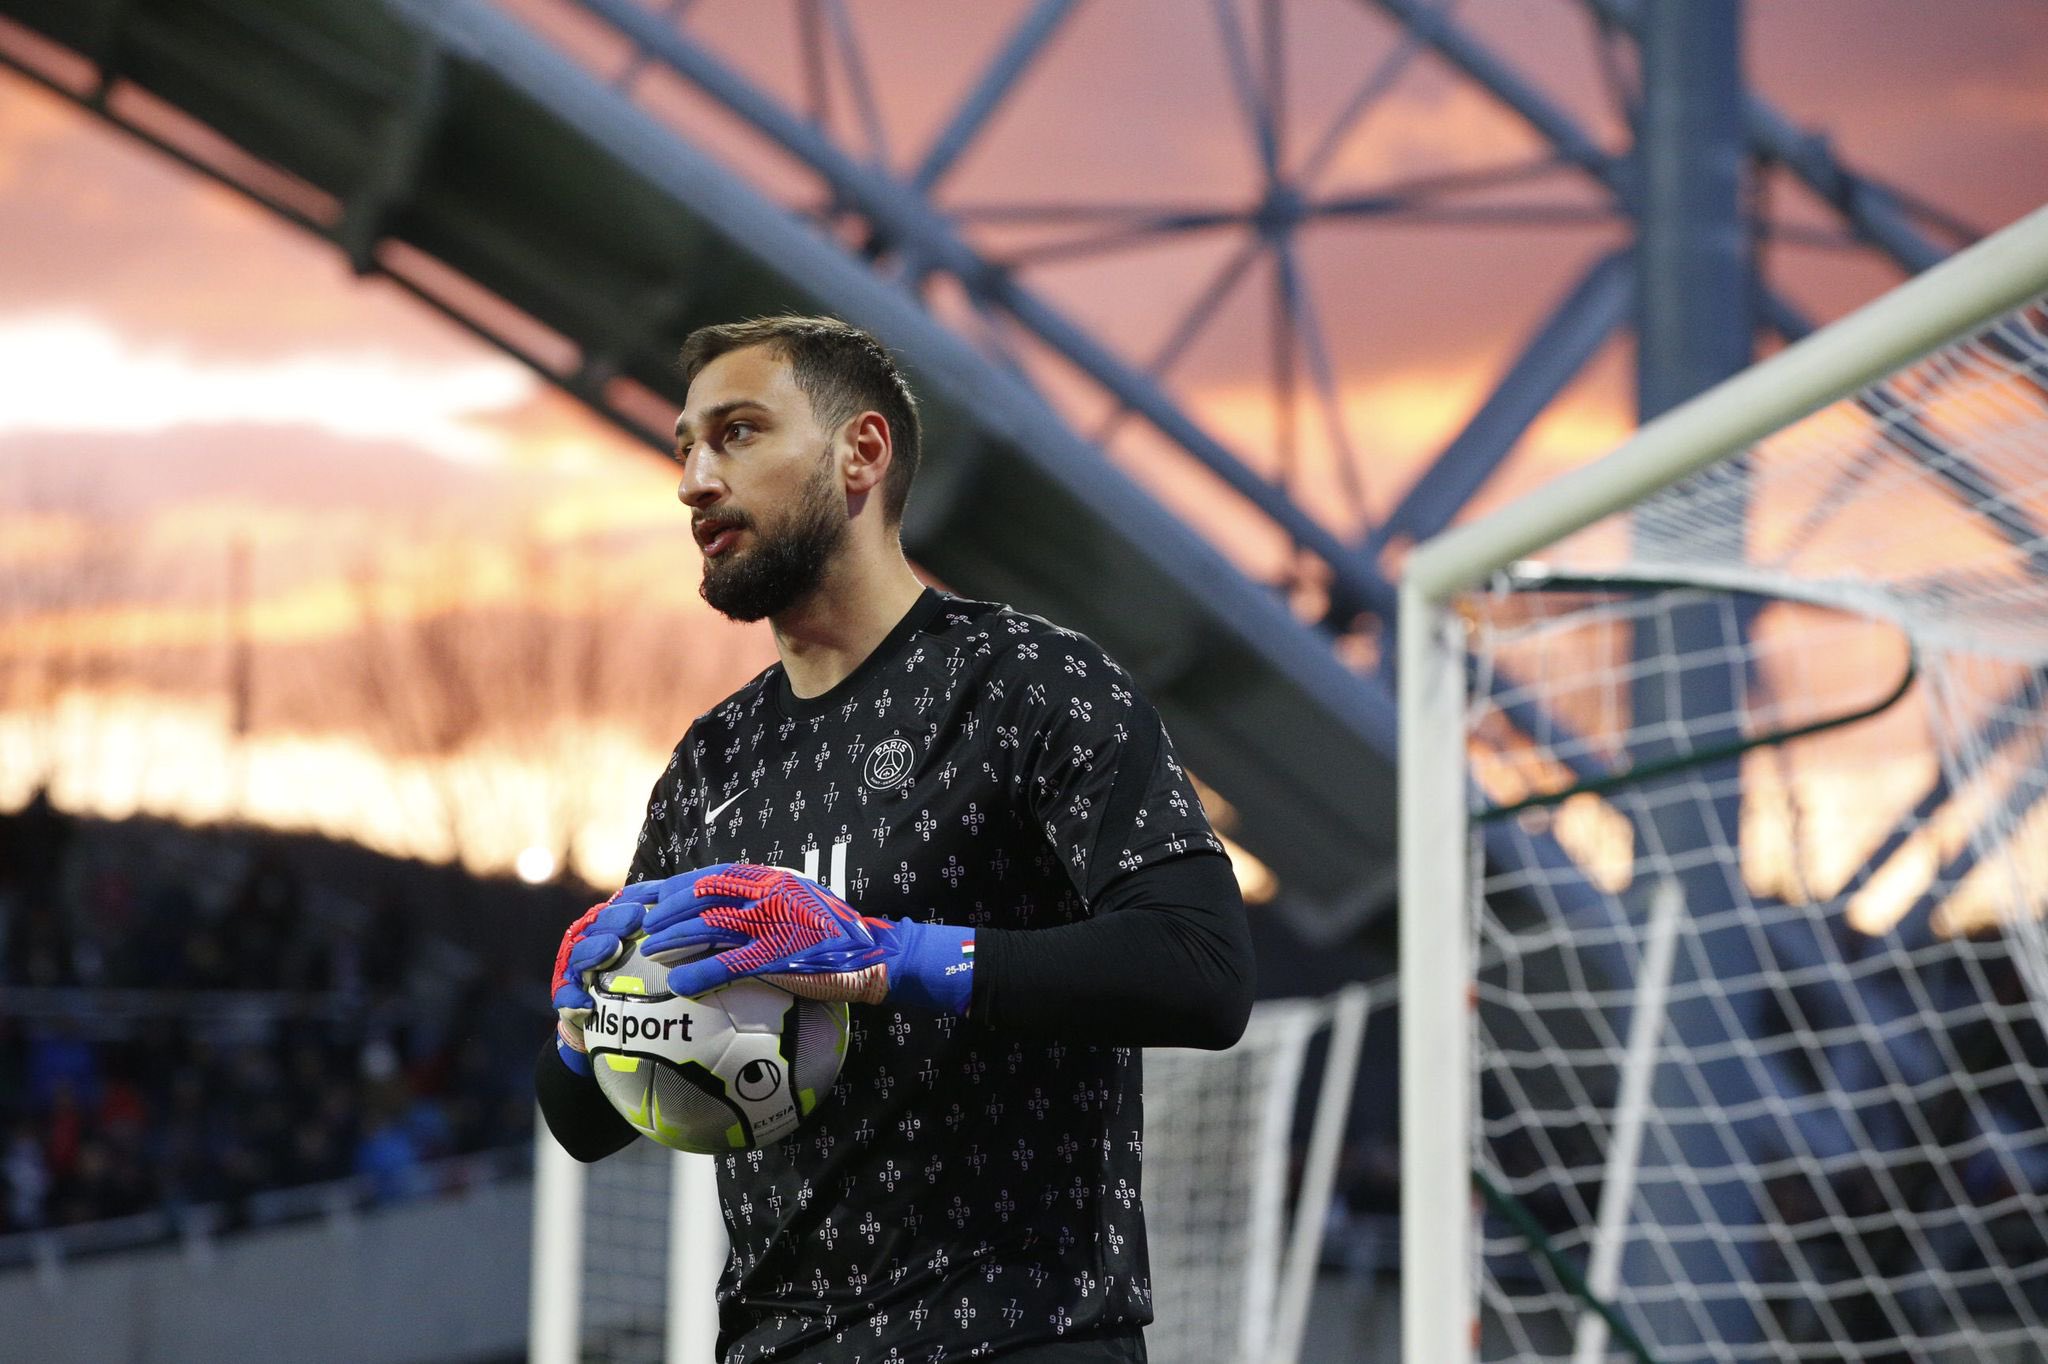 Things certainly have to change as I’m here to be owner of No 1, asserts Gianluigi Donnarumma